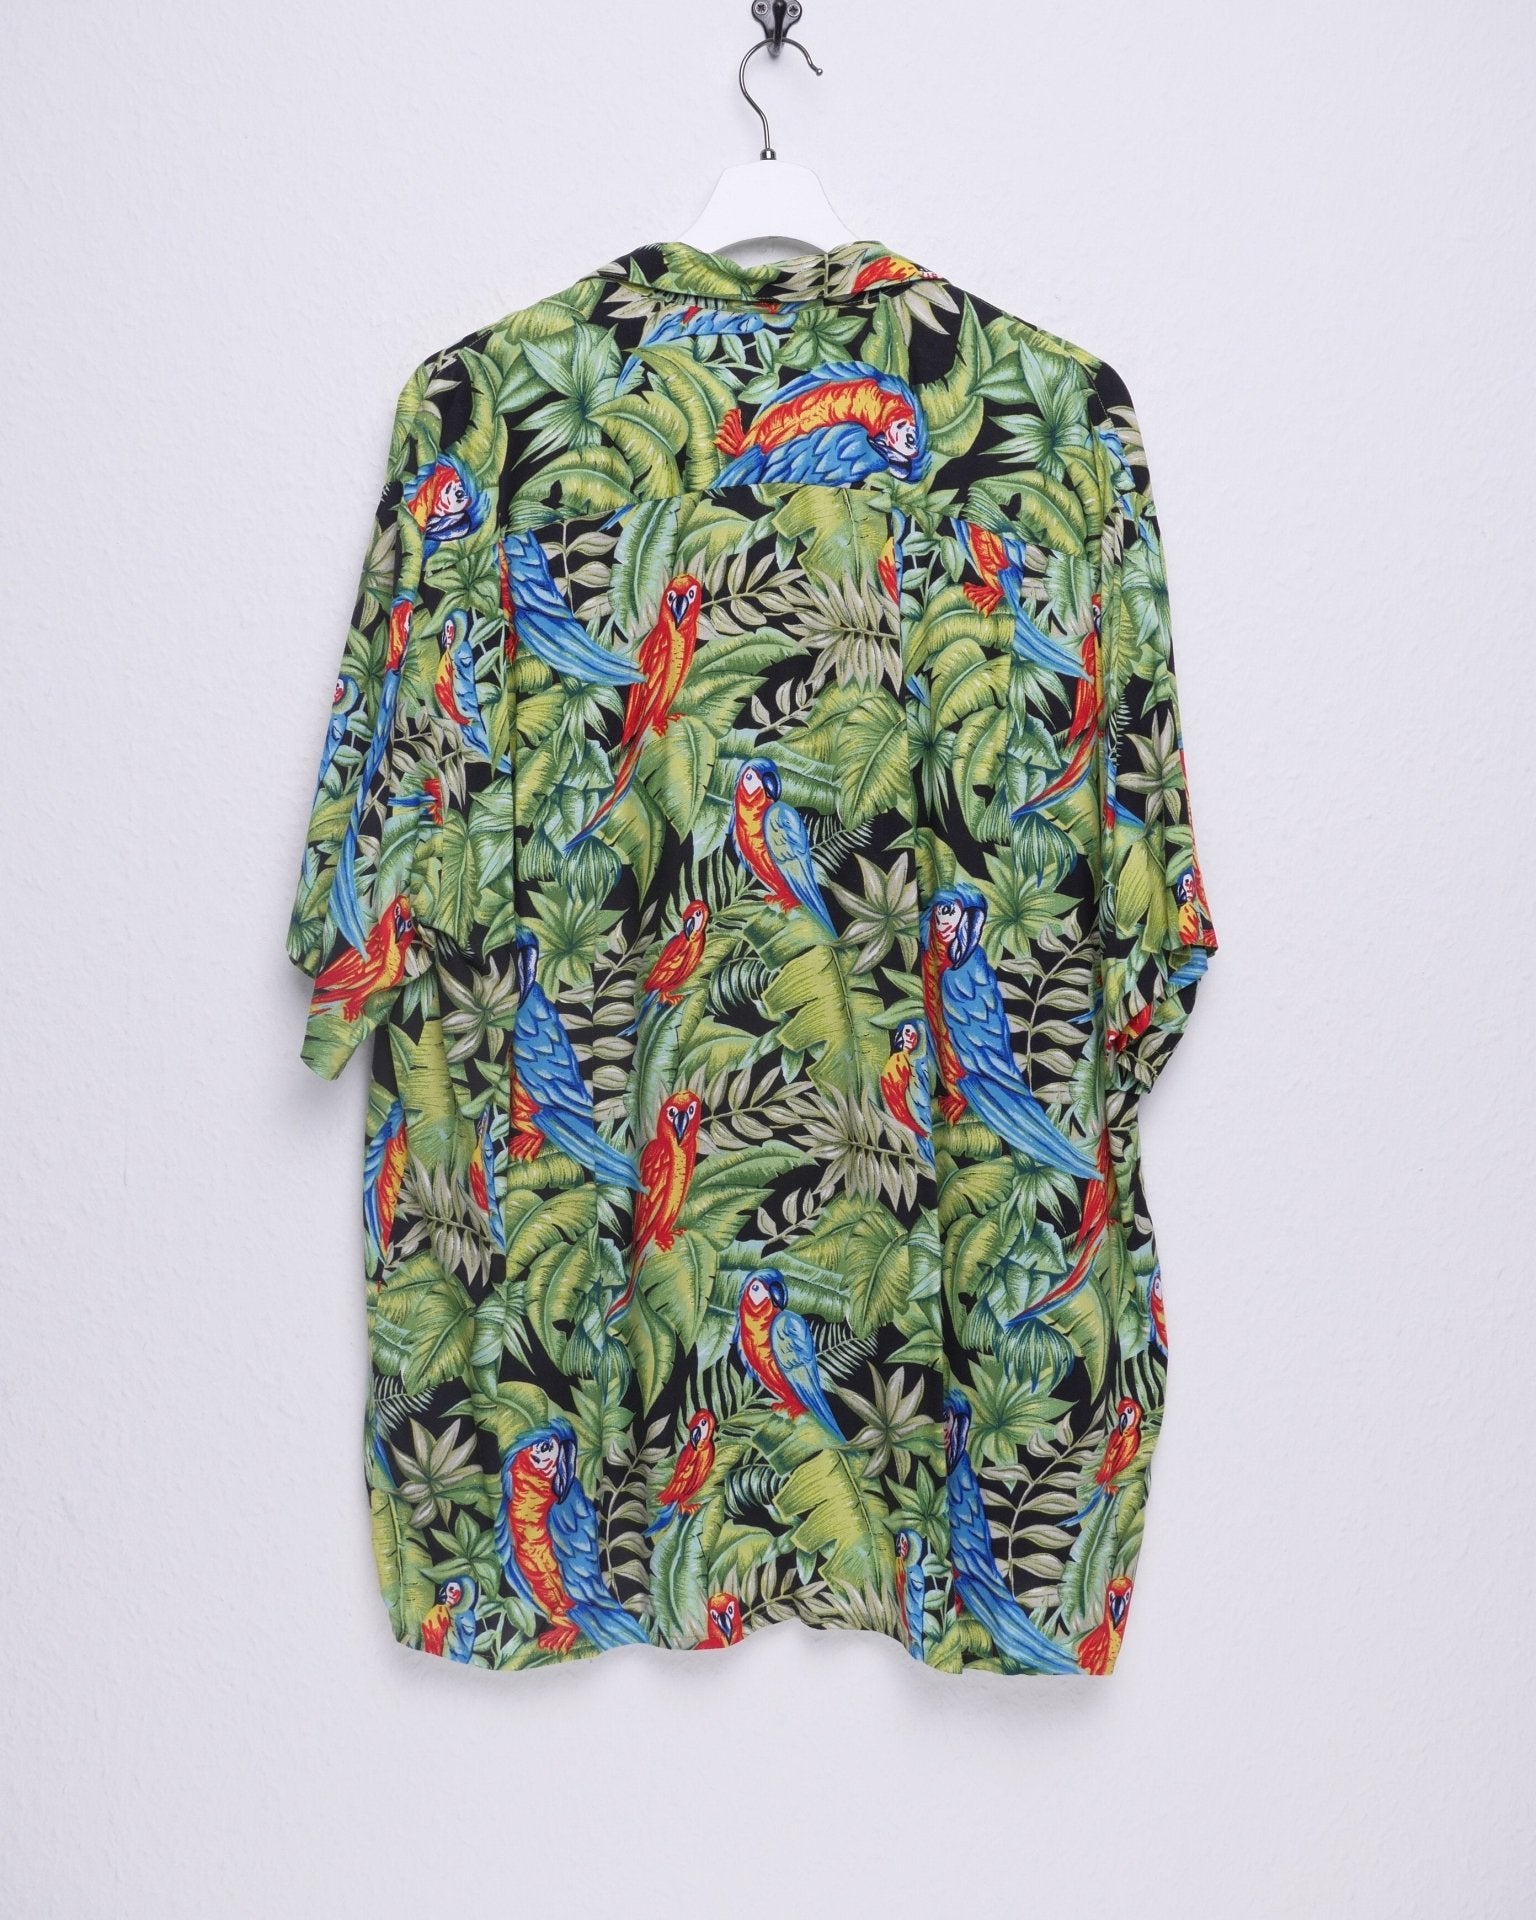 Parrot printed Graphic Vintage S/S Hemd - Peeces